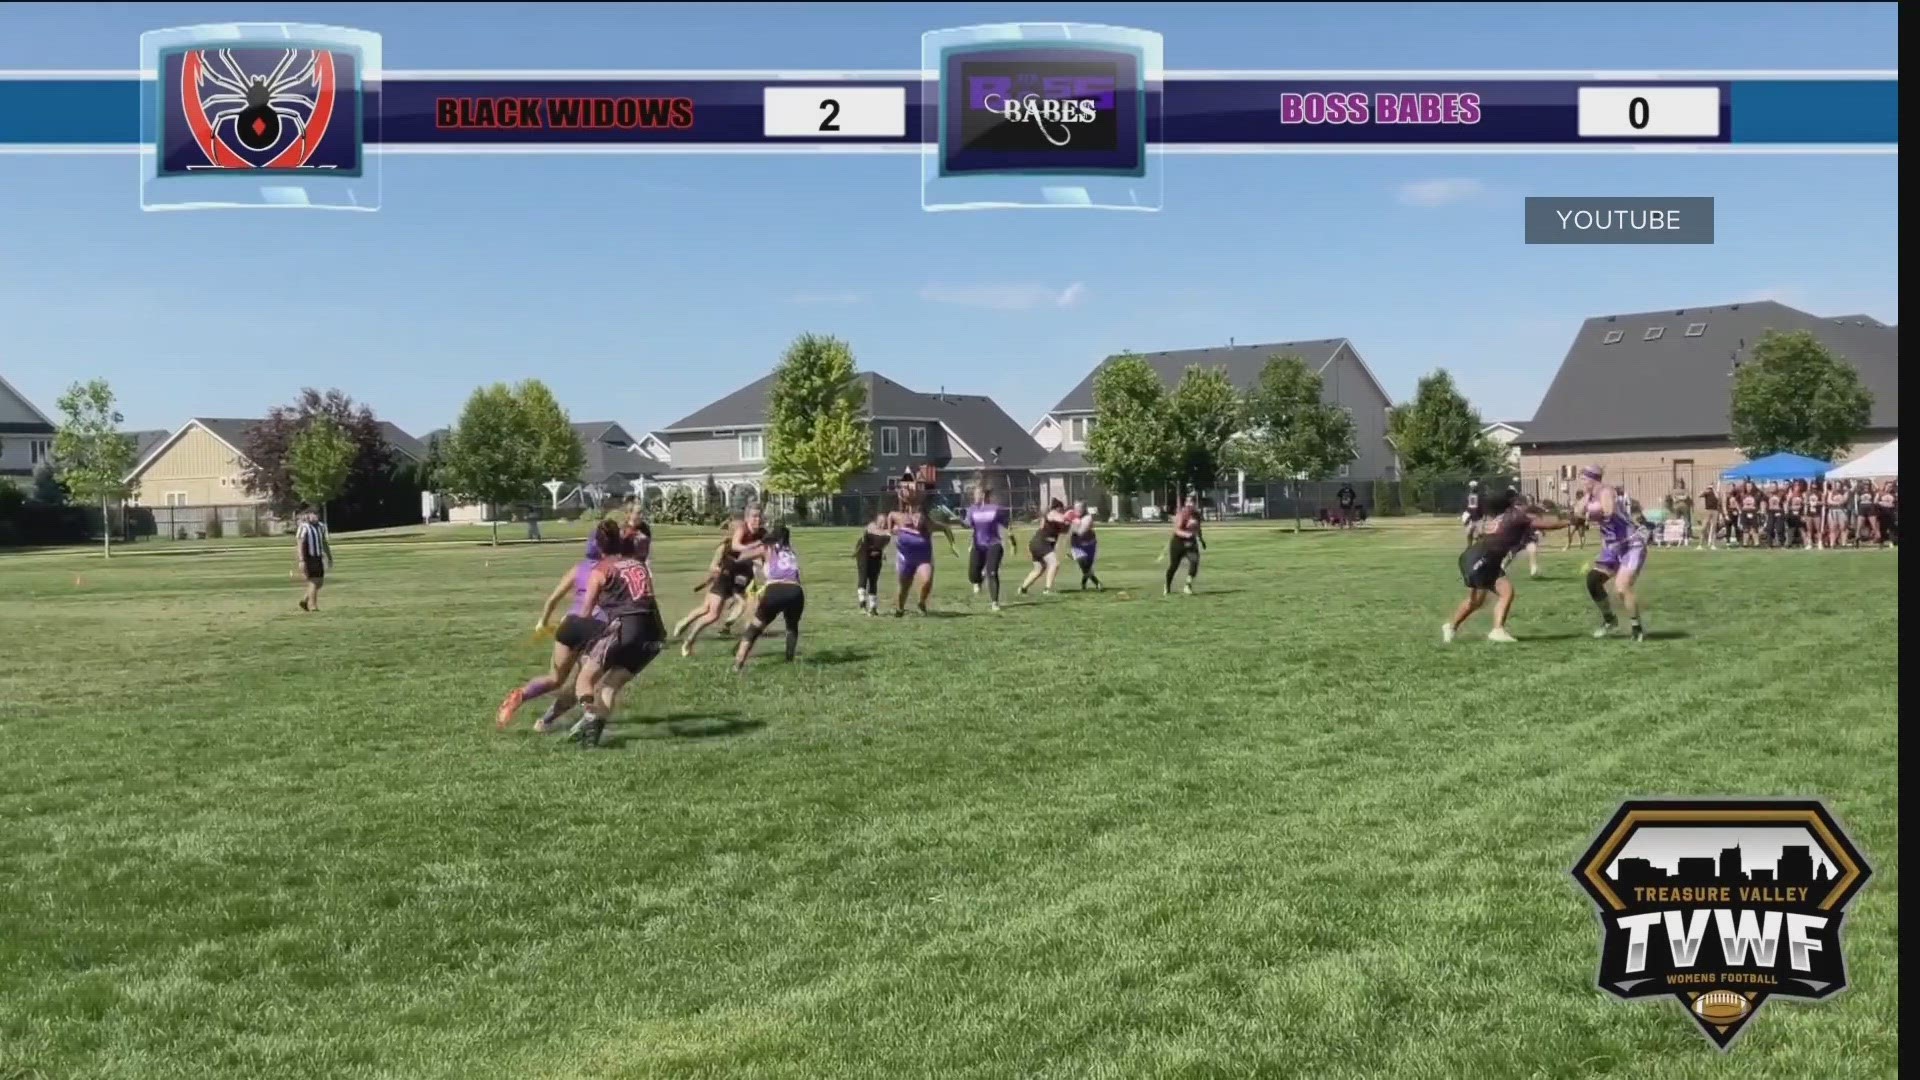 League organizers are partnering with Optimist Youth Football to launch Idaho's first-ever non-contact flag football league for girls aged 8 to 13.